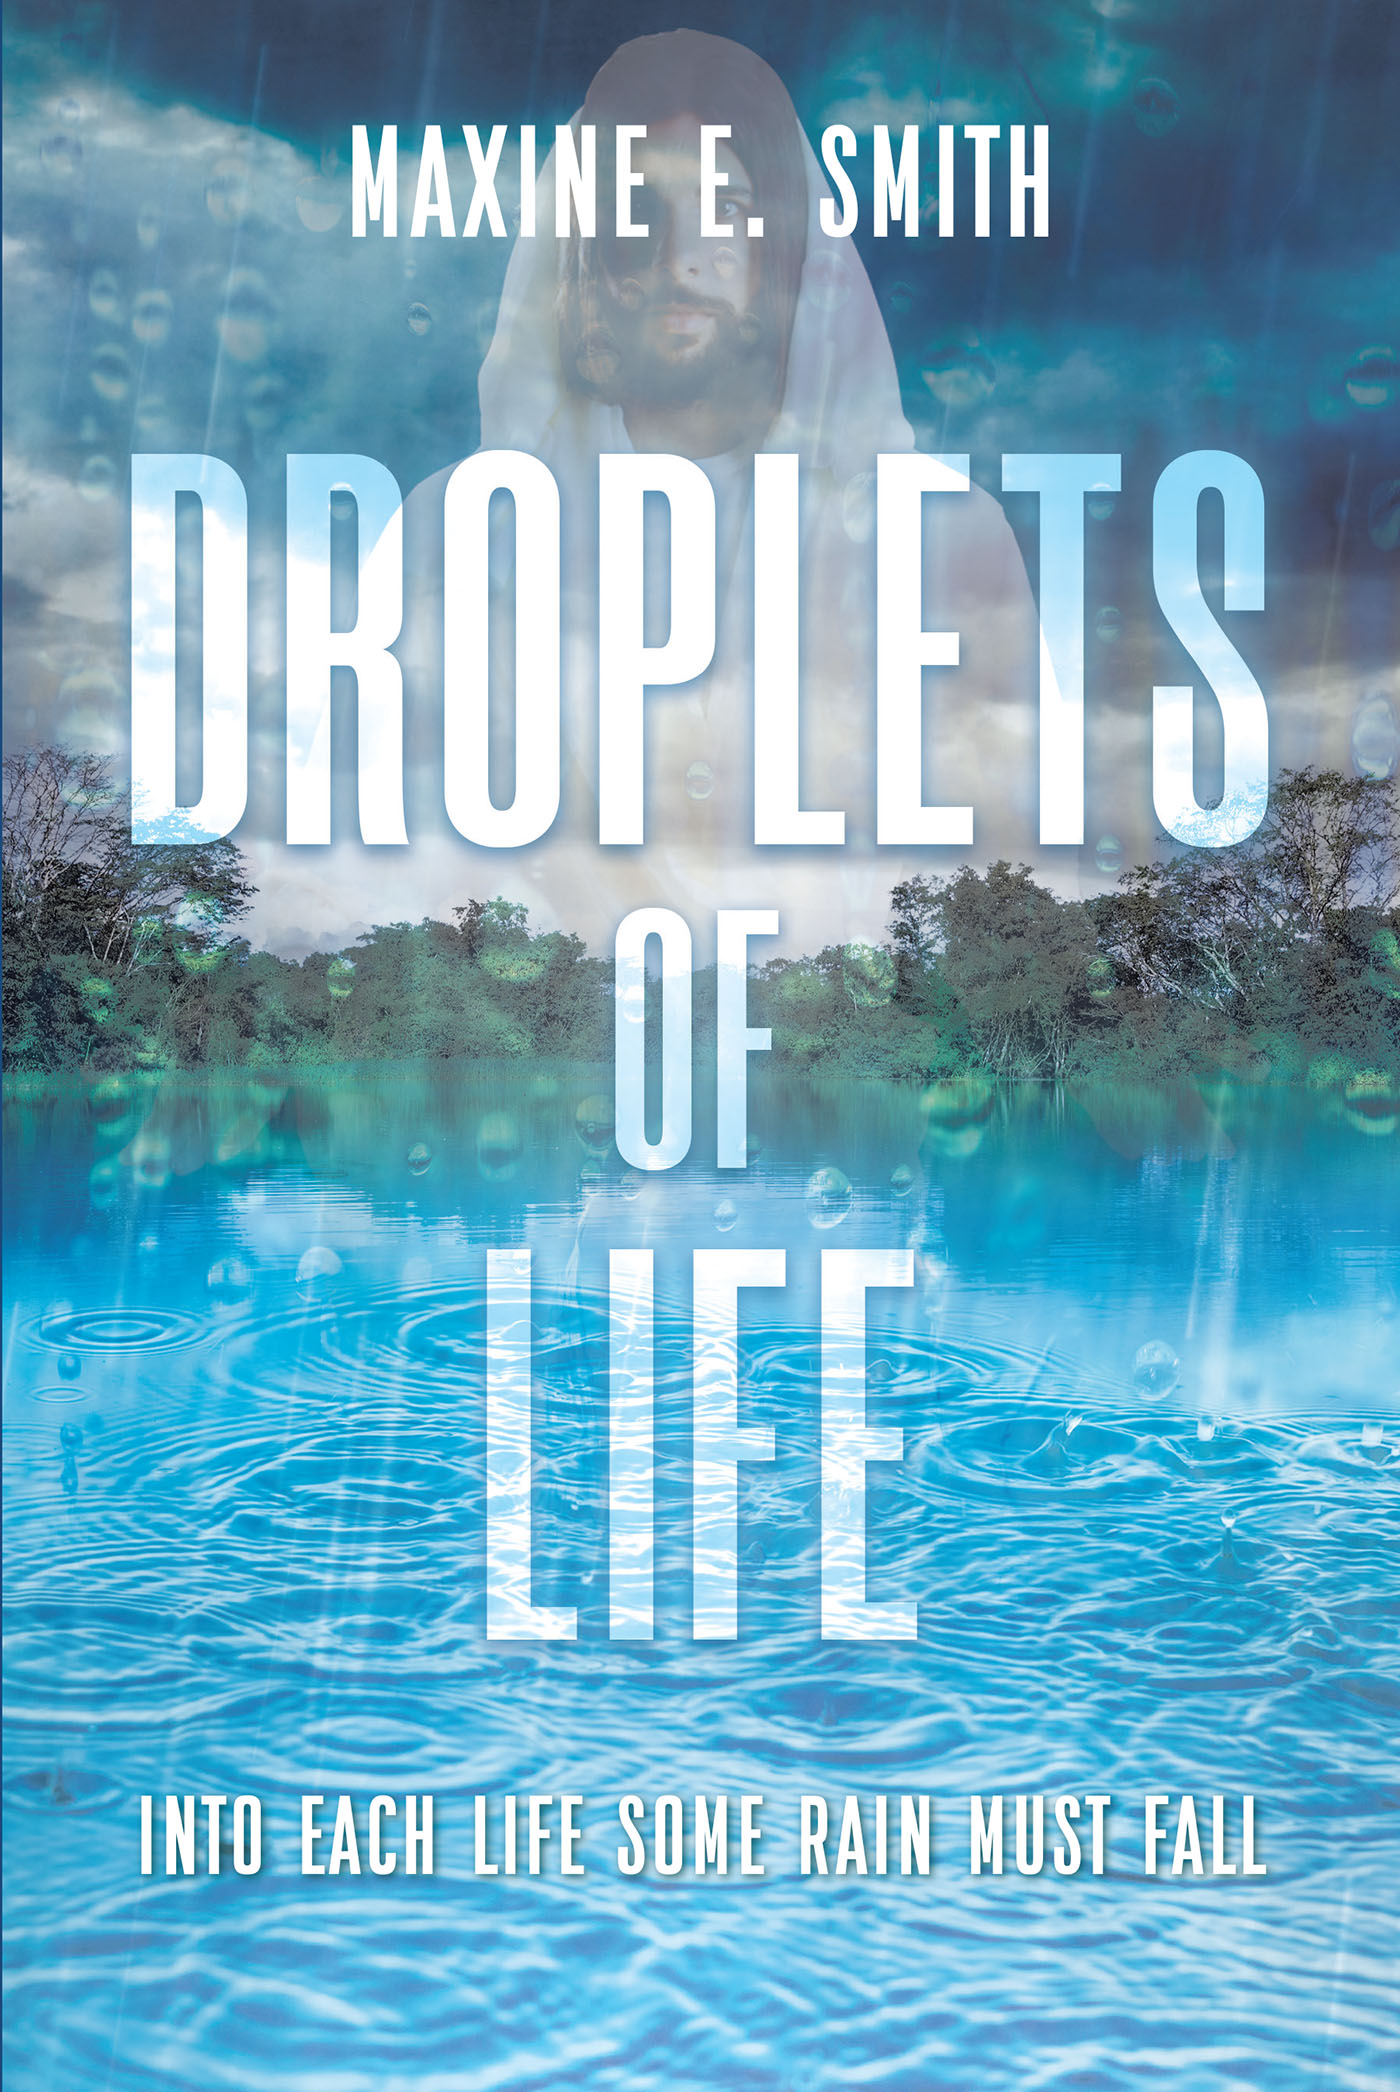 Maxine E. Smith’s Newly Released “Droplets of Life: Into Each Life Some Rain Must Fall” is a Passionate Celebration of All God Offers